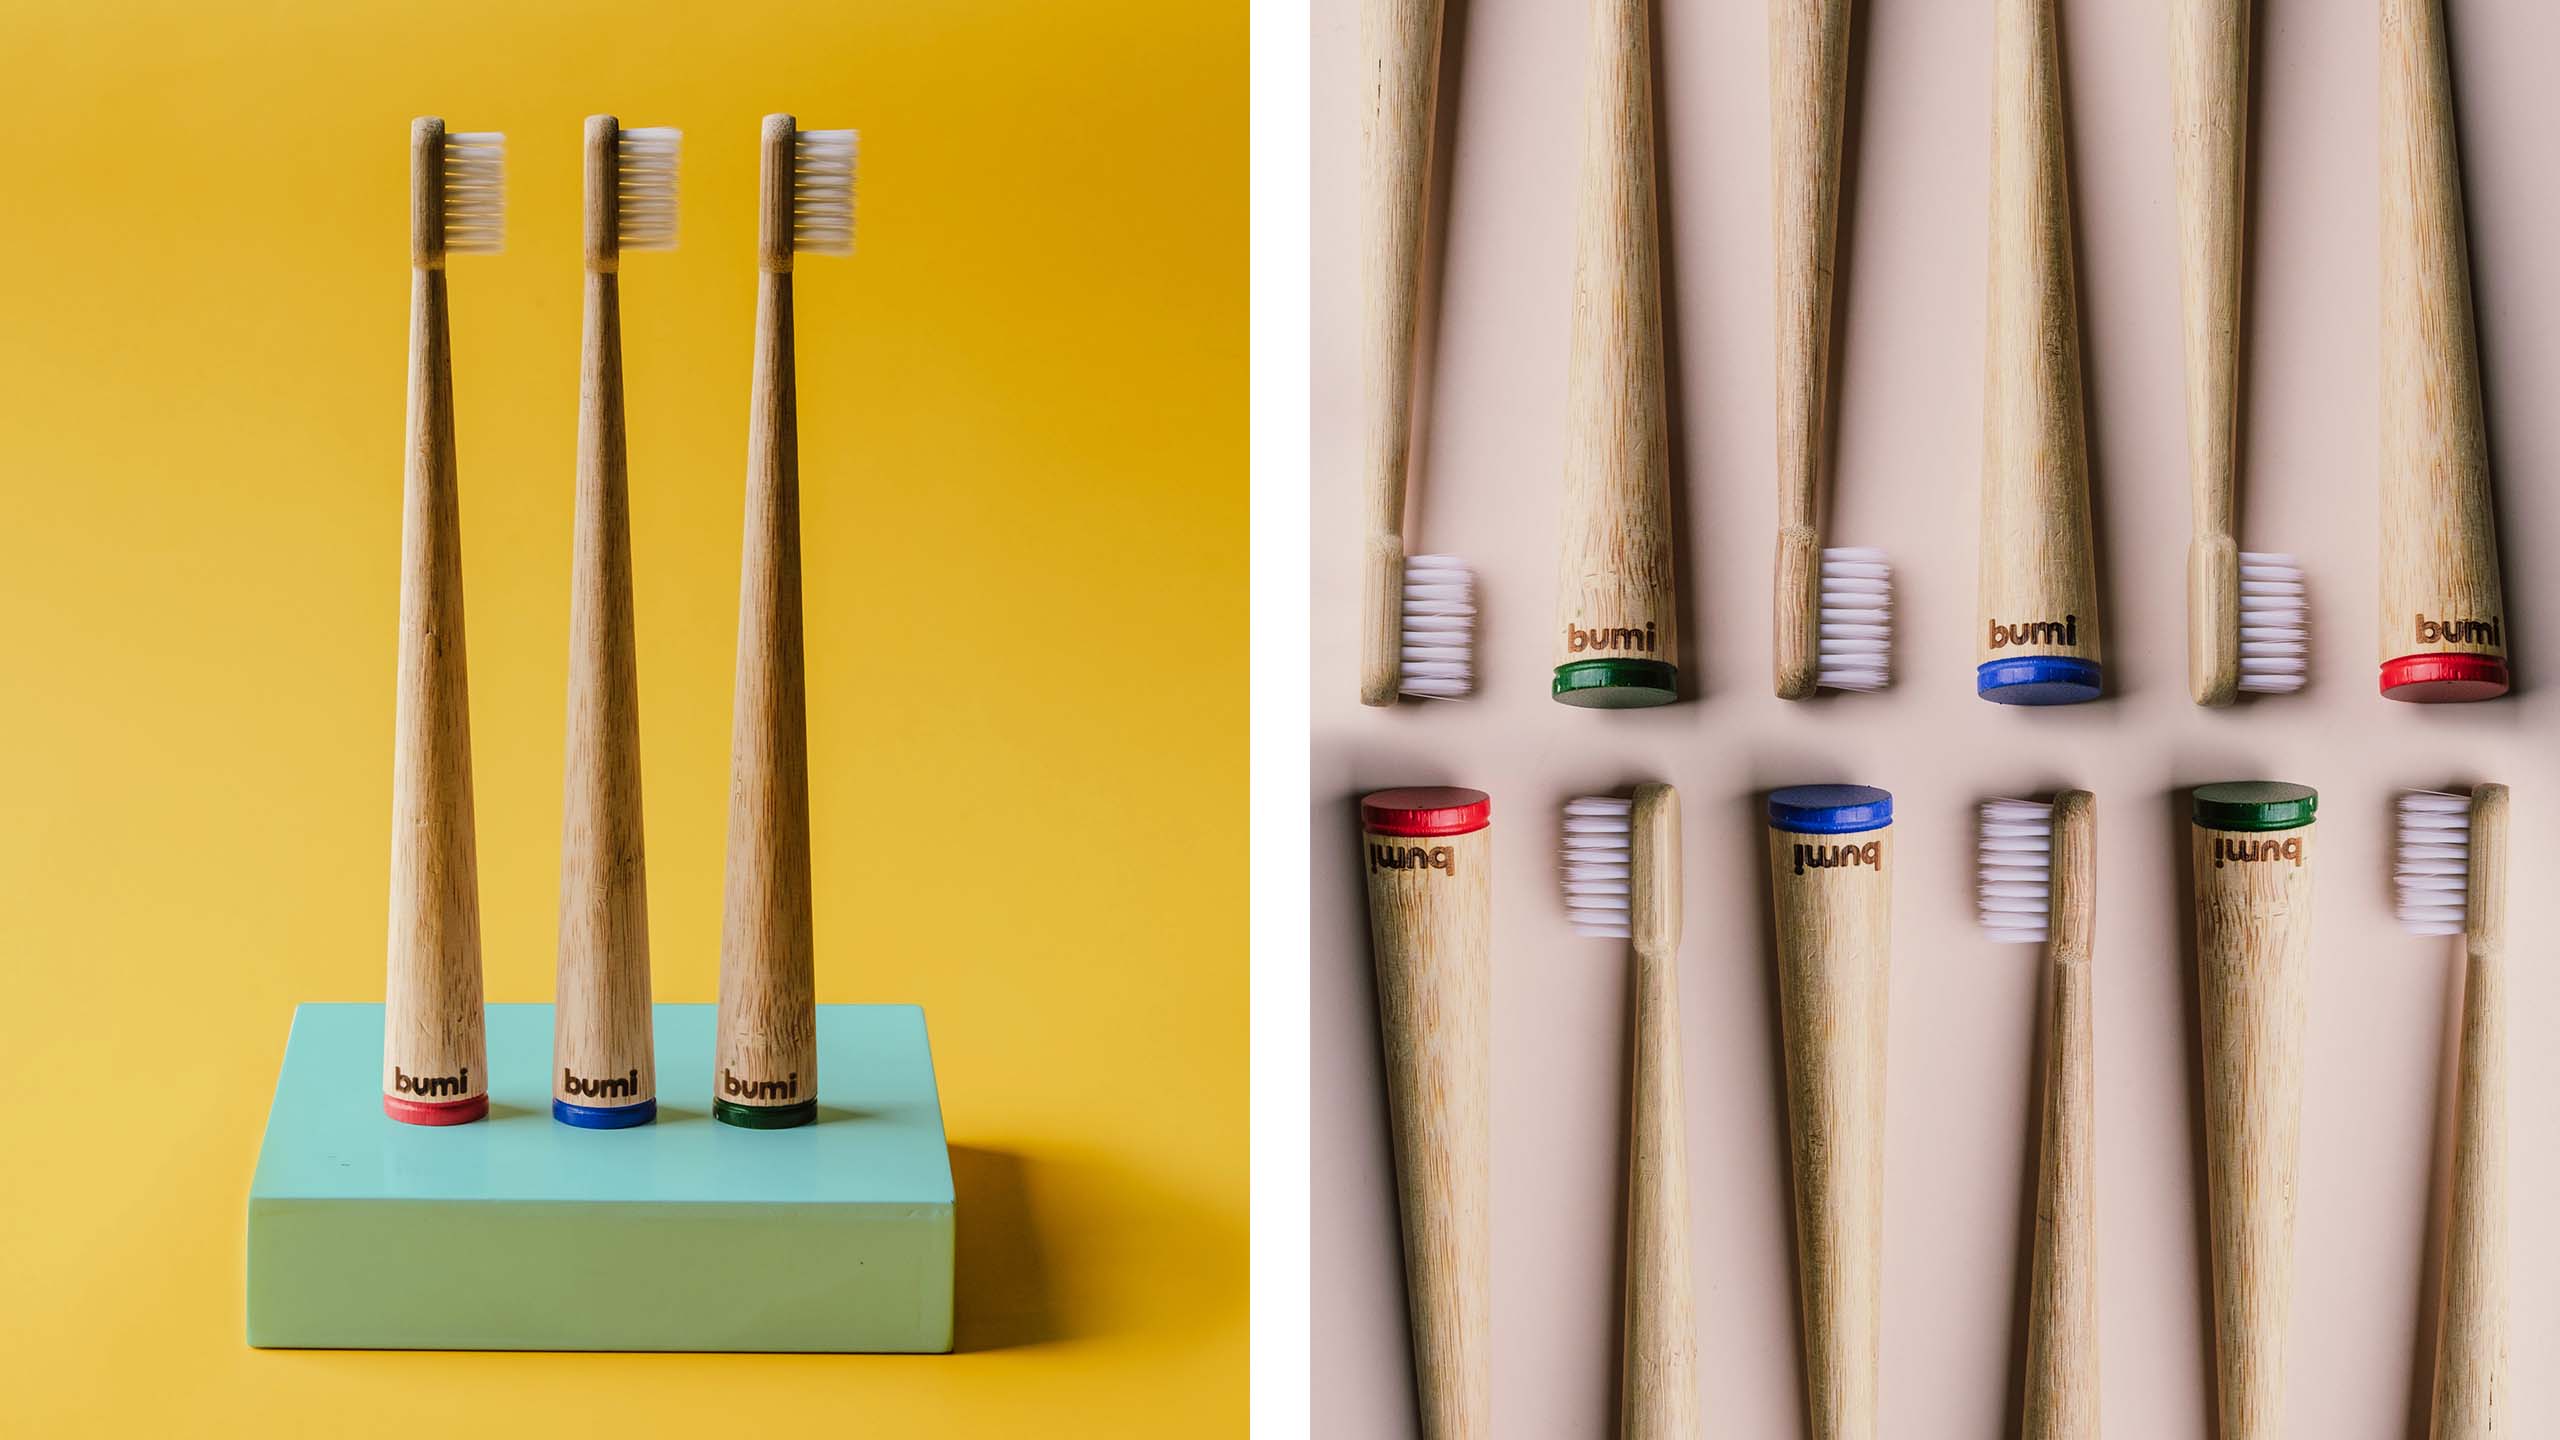 Minimal and ergonomic product design for sustainable bamboo toothbrush brand Bumi